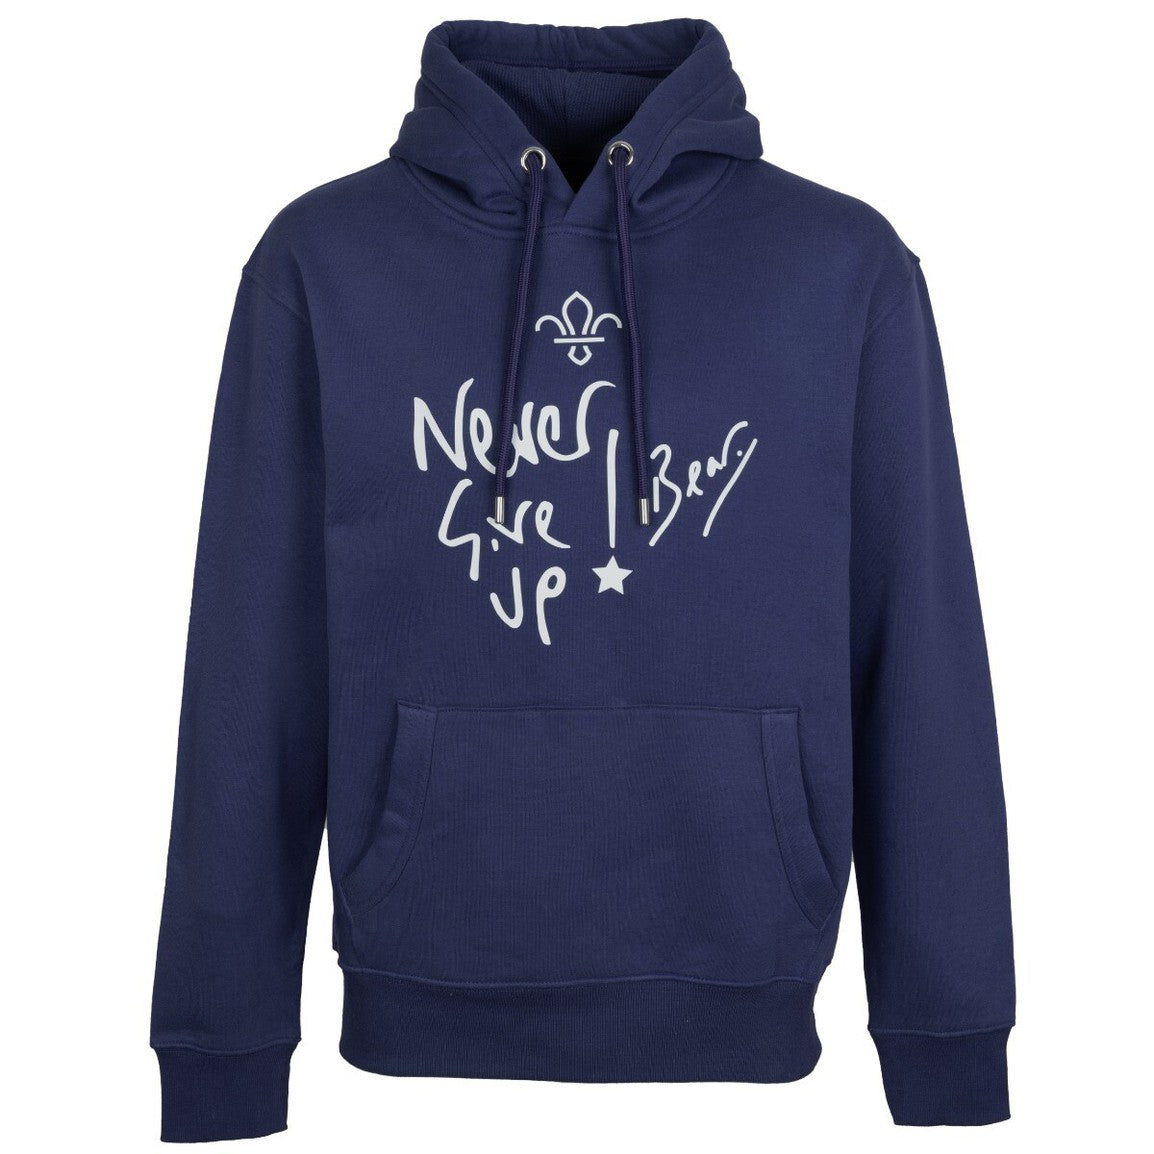 Chief Scout, Bear Grylls’ Never Give Up Hoodie